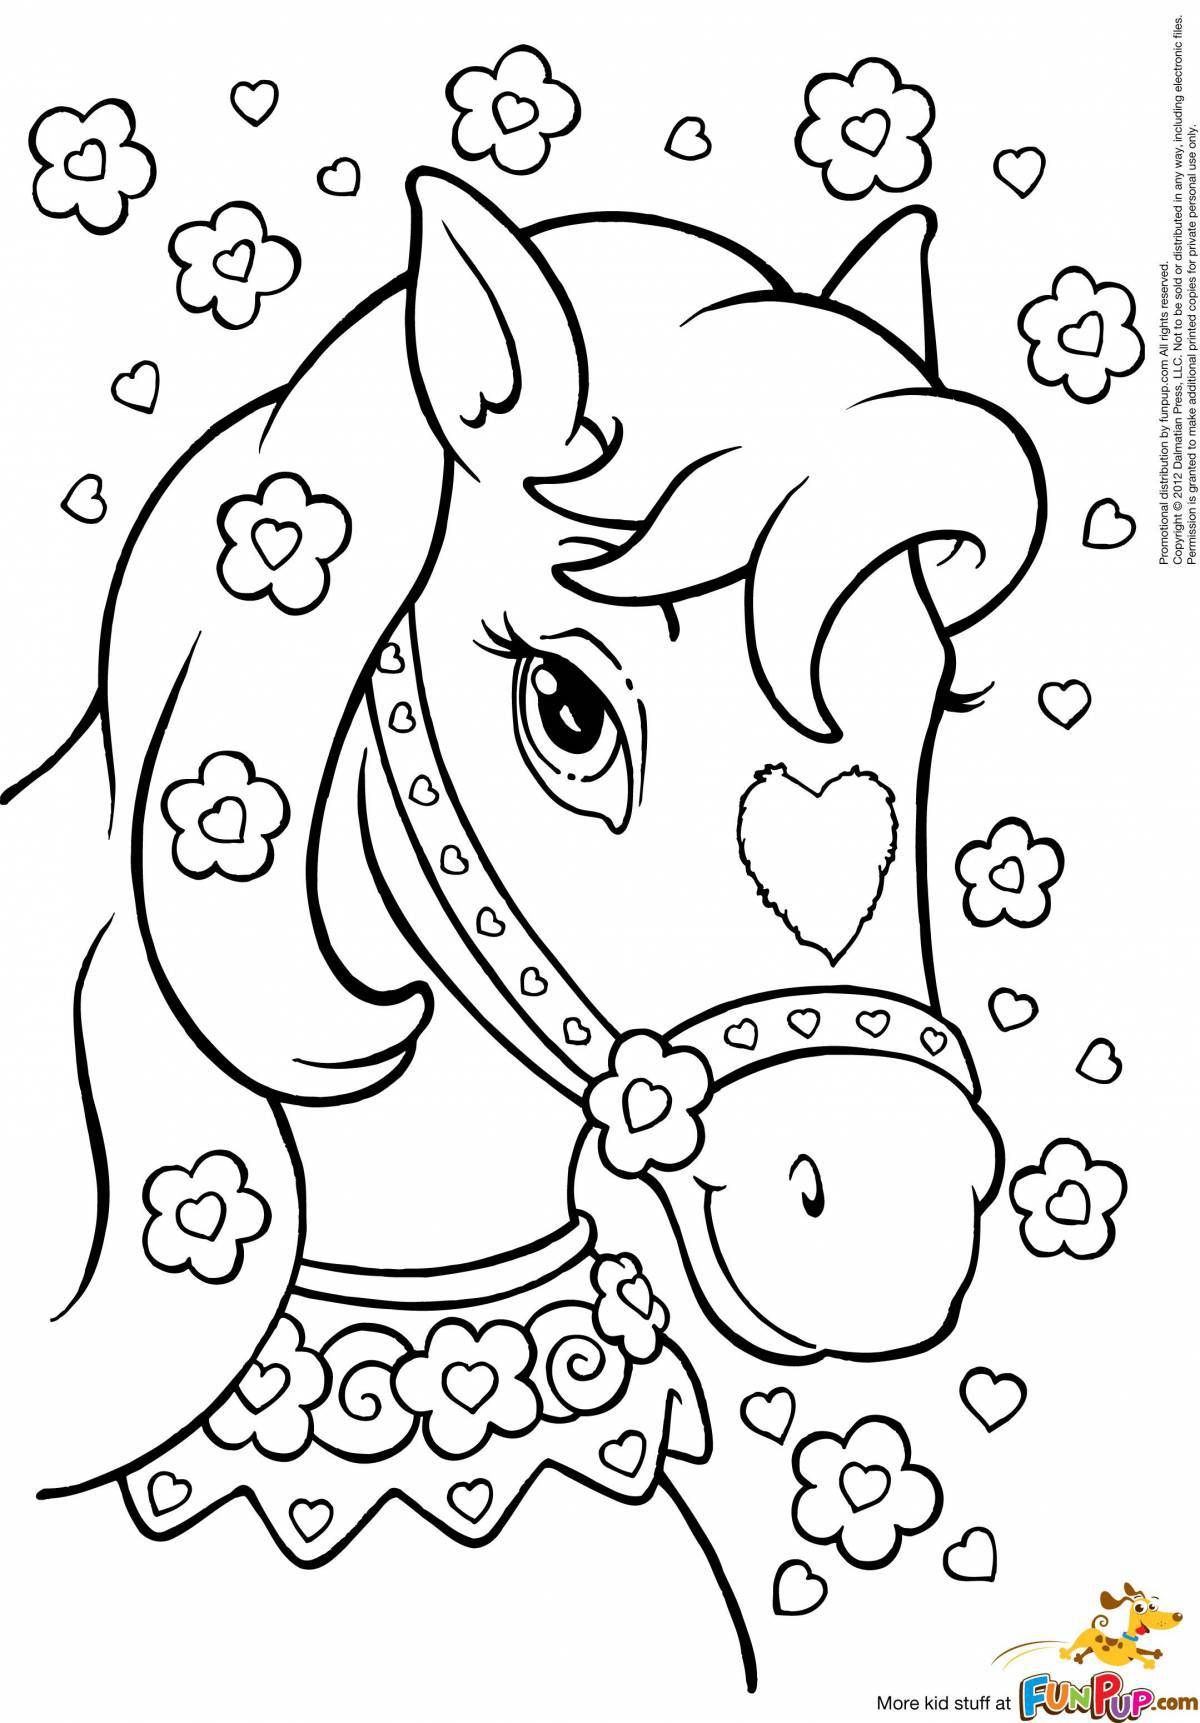 Coloring pages for girls 7-8 years old